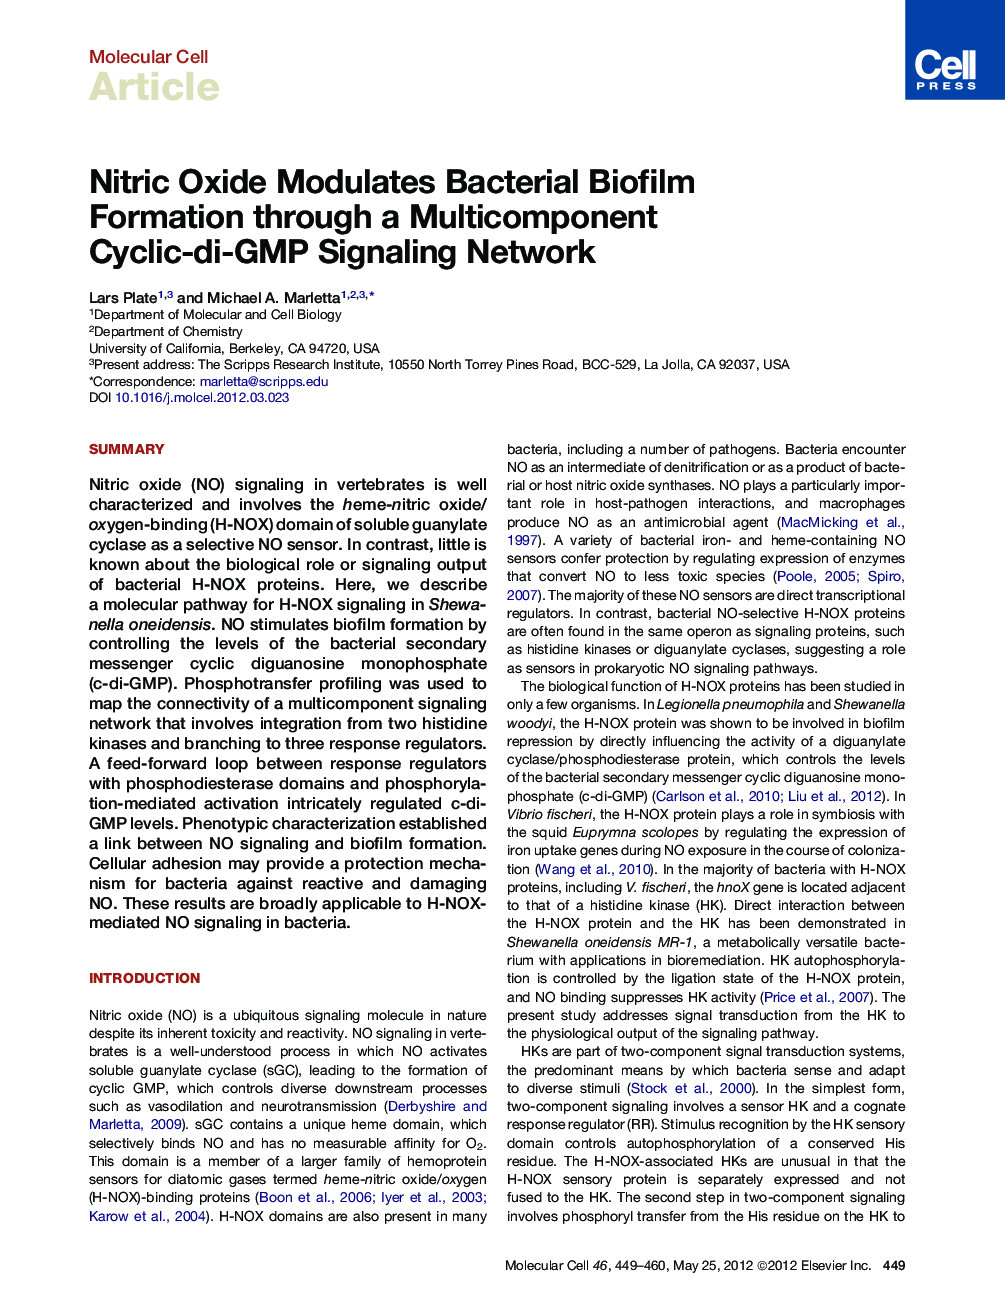 Nitric Oxide Modulates Bacterial Biofilm Formation through a Multicomponent Cyclic-di-GMP Signaling Network